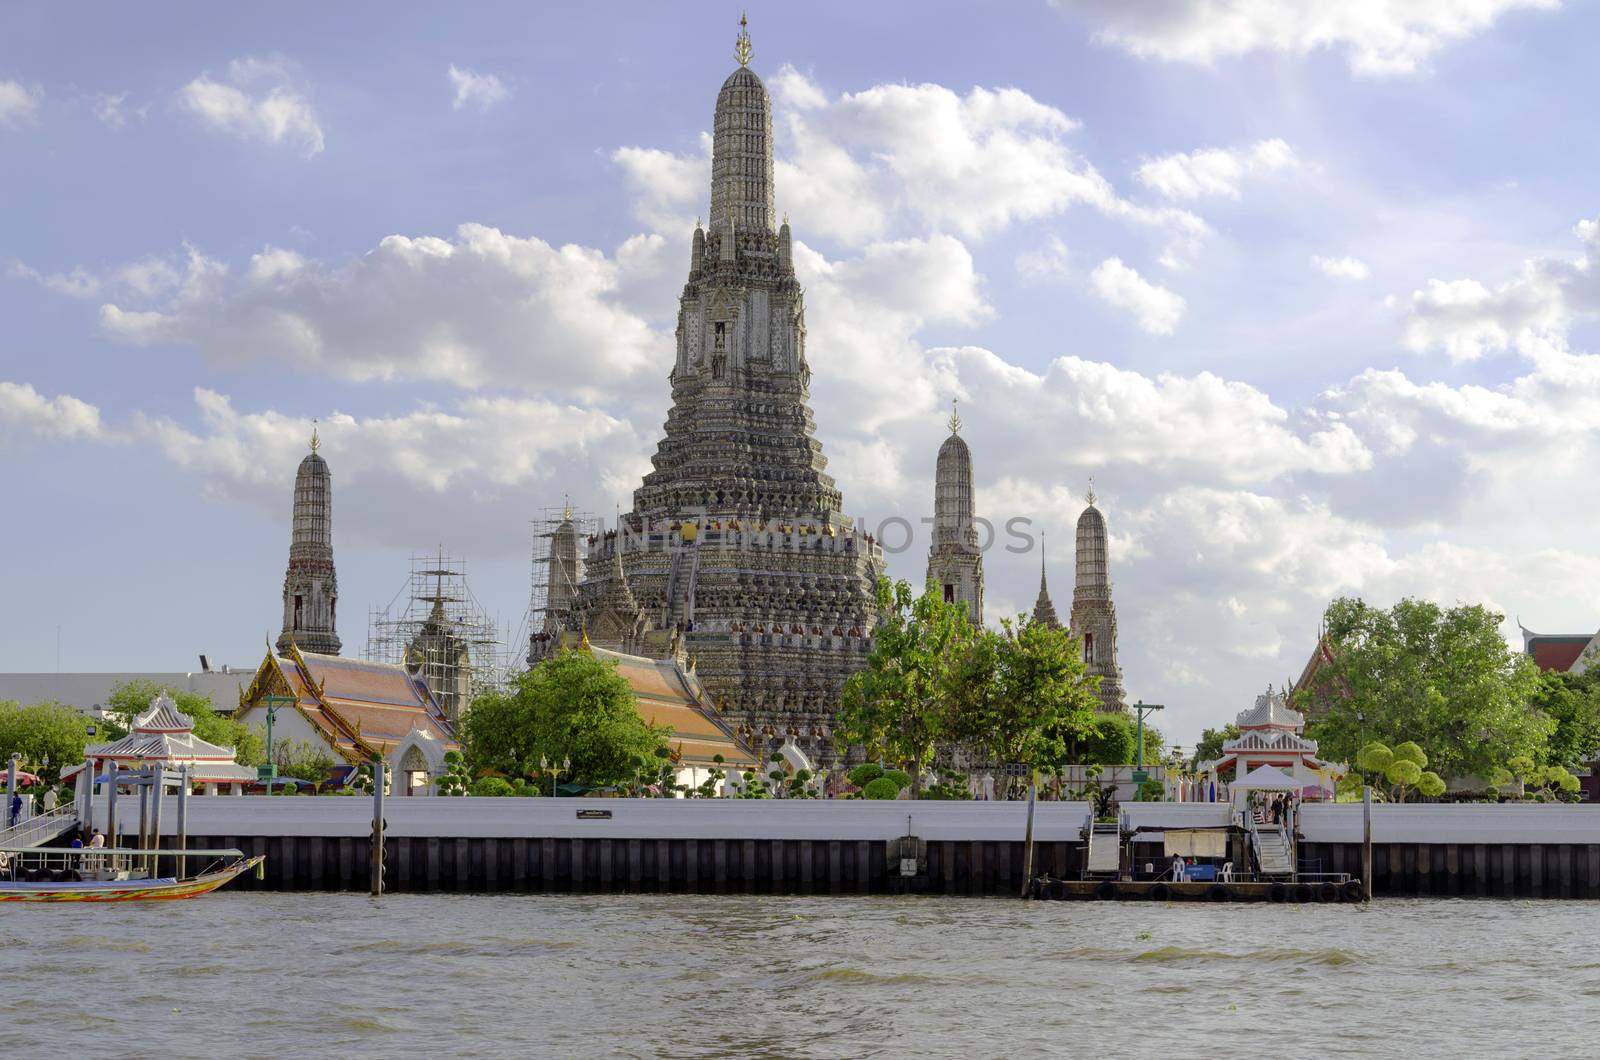 BANGKOK - JULY 3: View of Wat arun temple from ferry boat on chao phra river, Wat Arun is a Buddhist temple (wat) in Bangkok Yai district of Bangkok. July 3, 2014 in Bangkok,Thailand